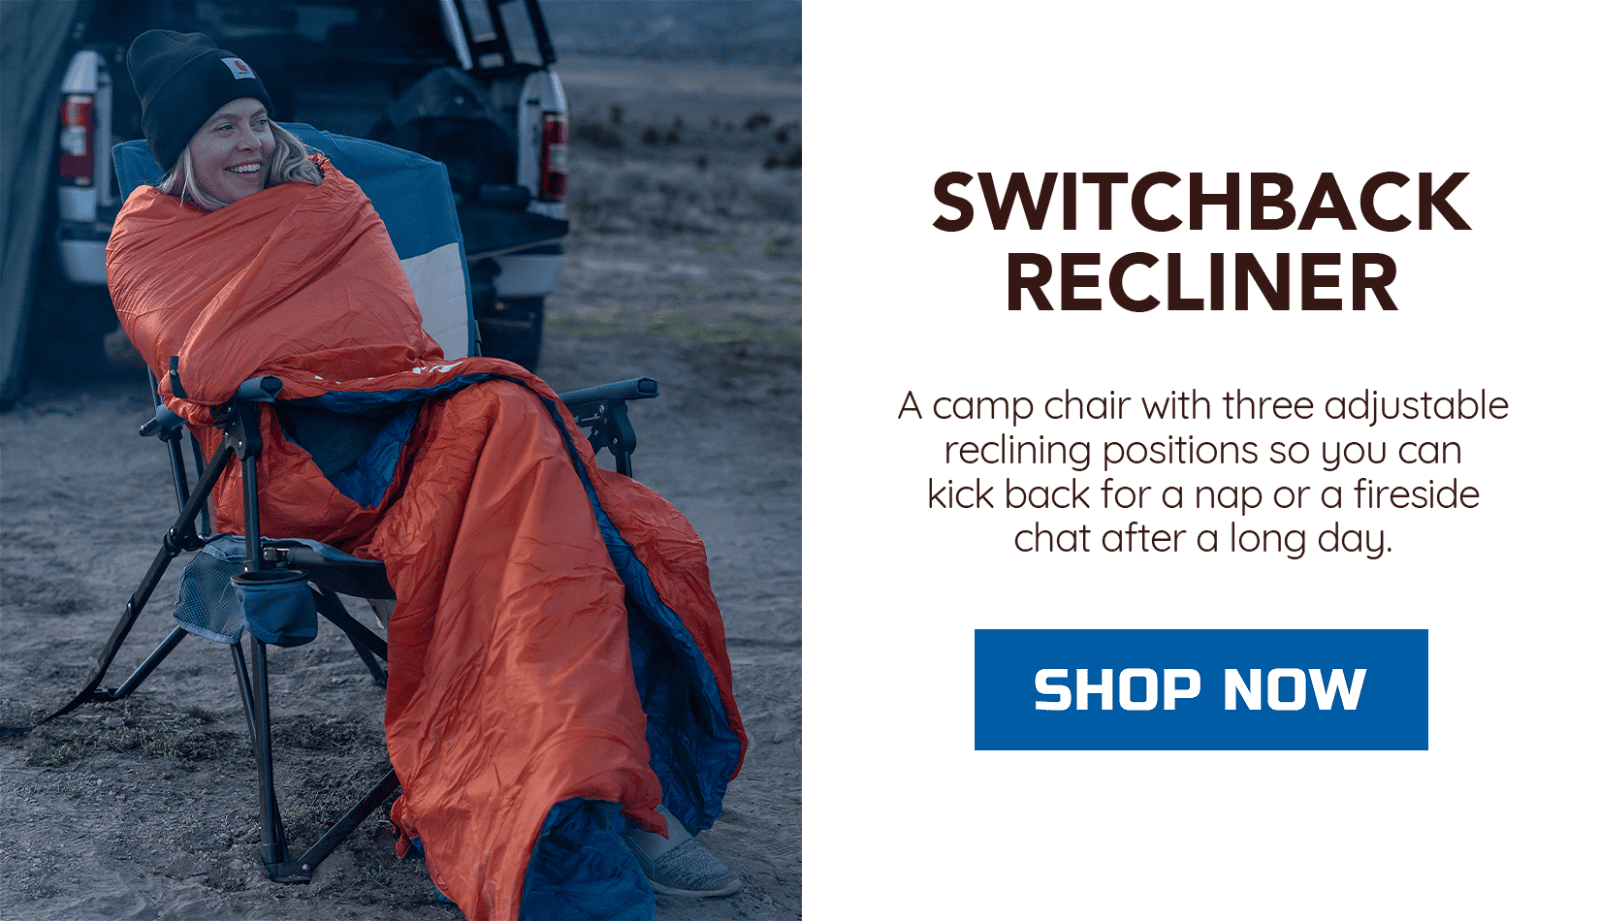 SWITCHBACK RECLINING CAMP CHAIR: A camp chair with three adjustable reclining positions so you can kick back for a nap or a fireside chat after a long day.